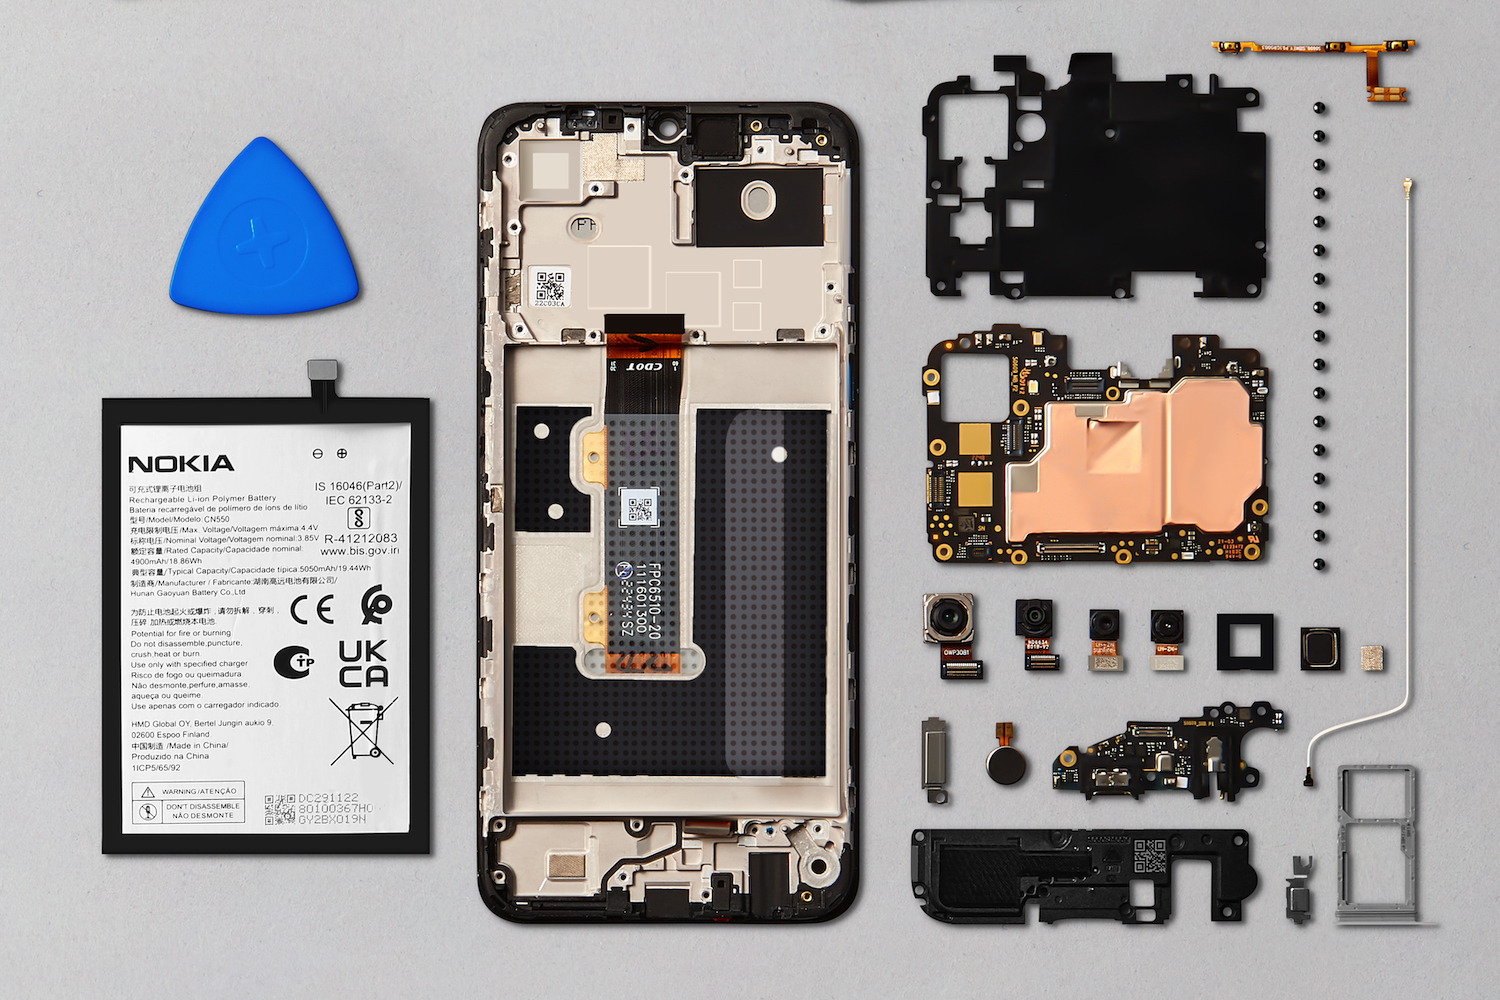 The Nokia G22 broken down into its component parts.